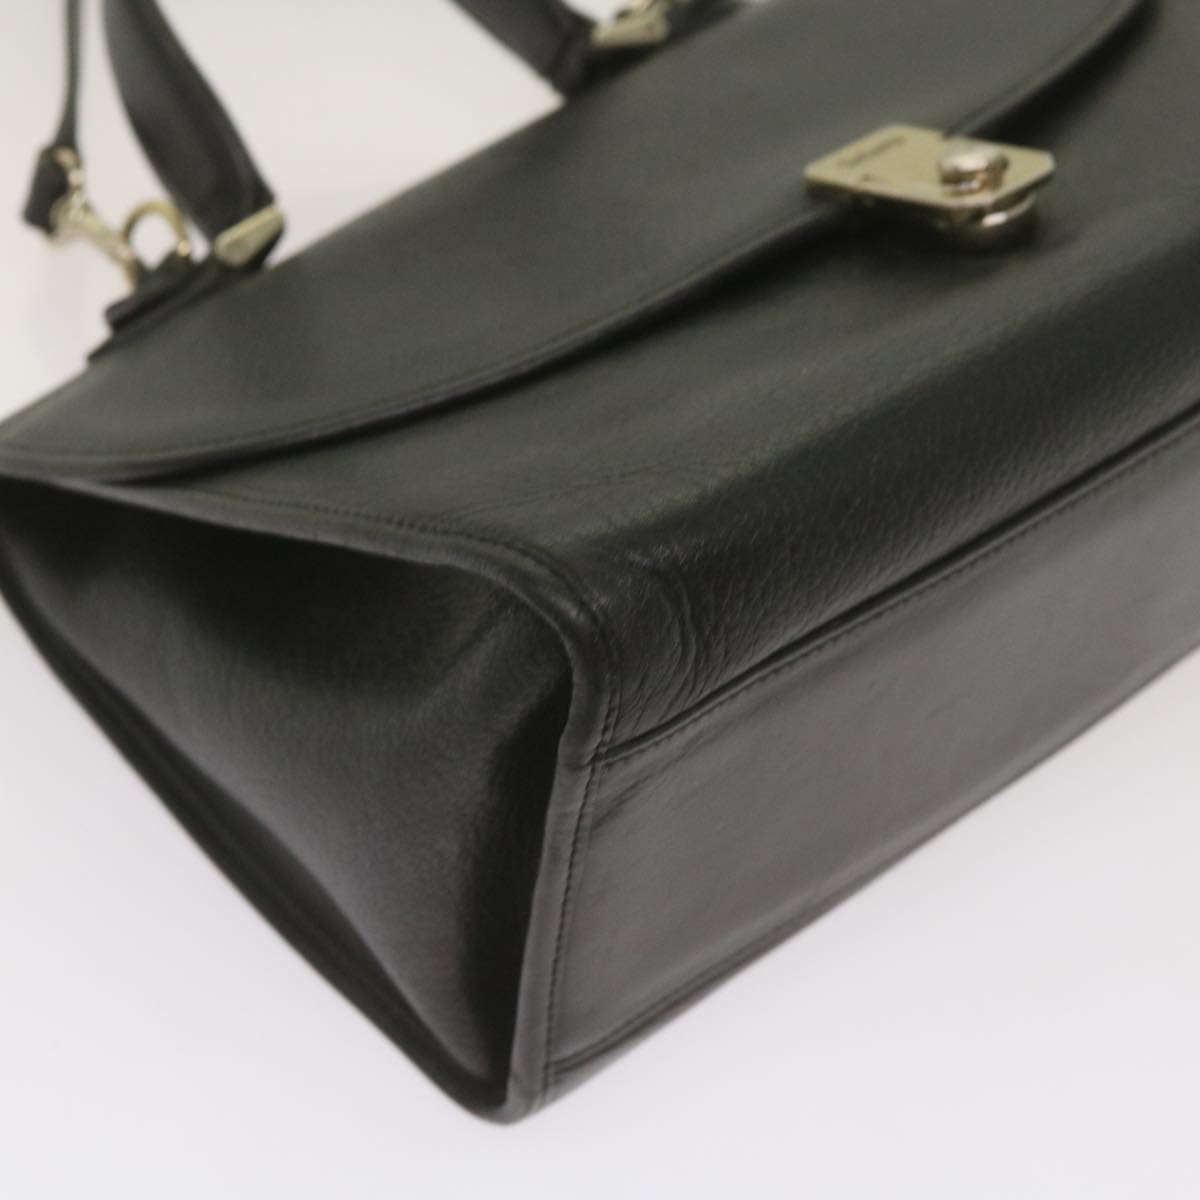 Burberrys Hand Bag Leather 2way Black Auth 68158